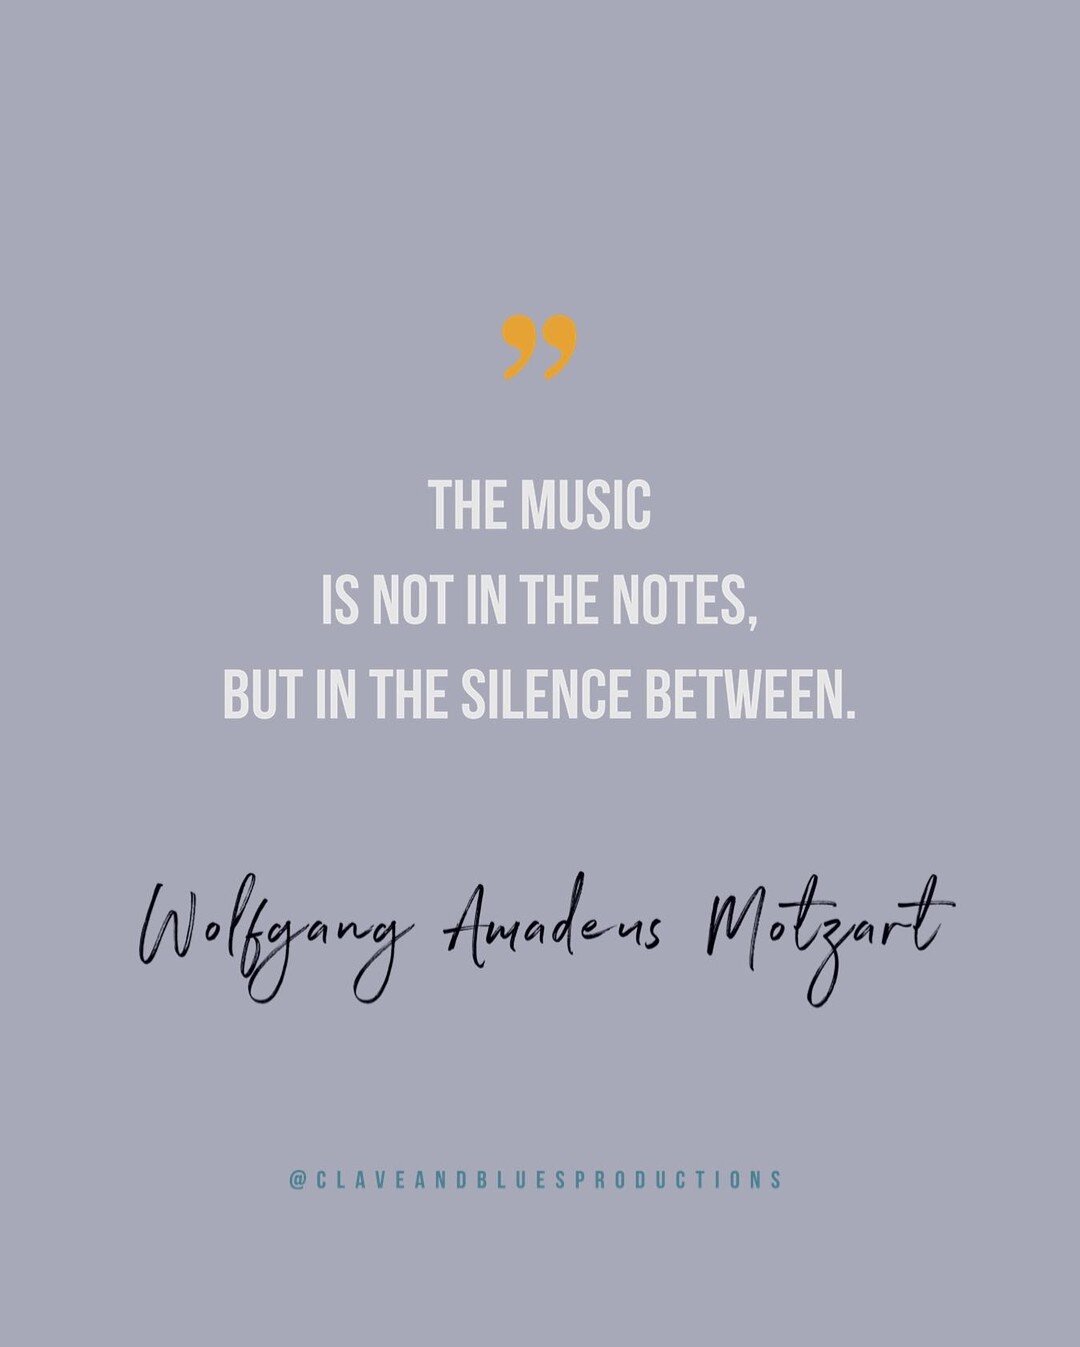 Sometimes when we write music, we focus on interesting melodies, exciting harmonies, and creative orchestration. Do you ever wonder or plan the silence in it? 🤔

#mondaymotivation 

Mozart was a prolific and influential composer of the Classical per